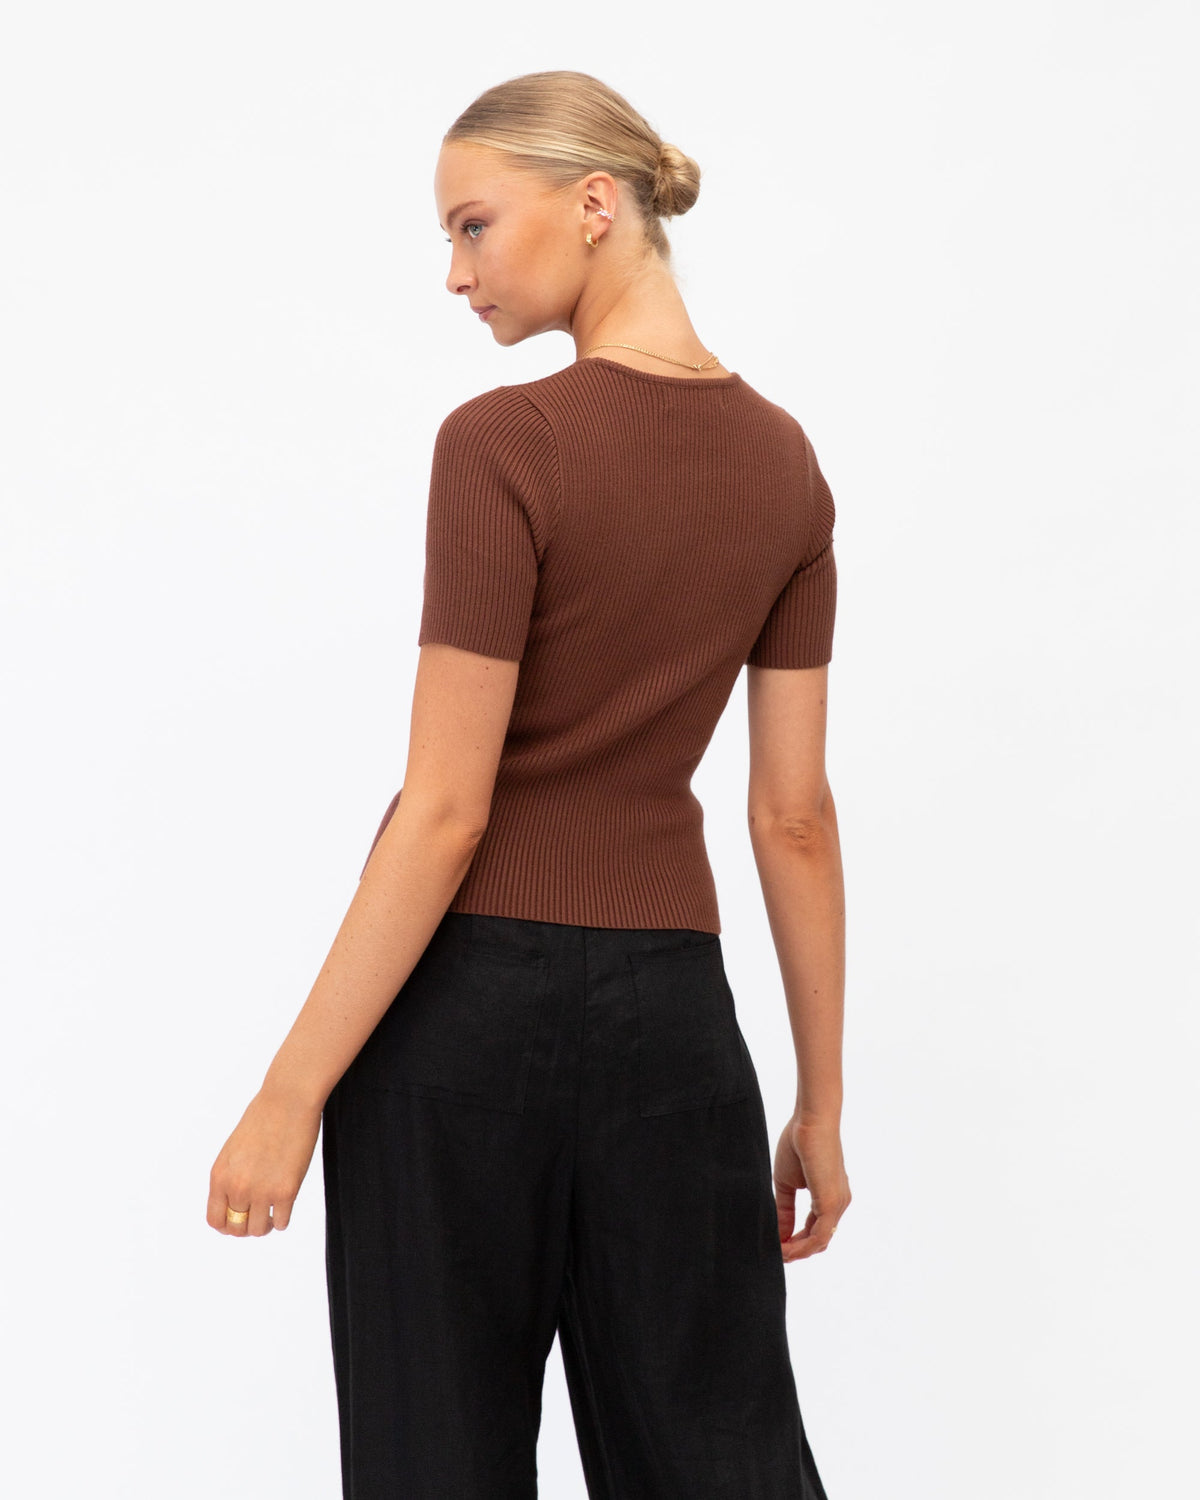 CHOCOLATE SHORT SLEEVE KNIT TOP